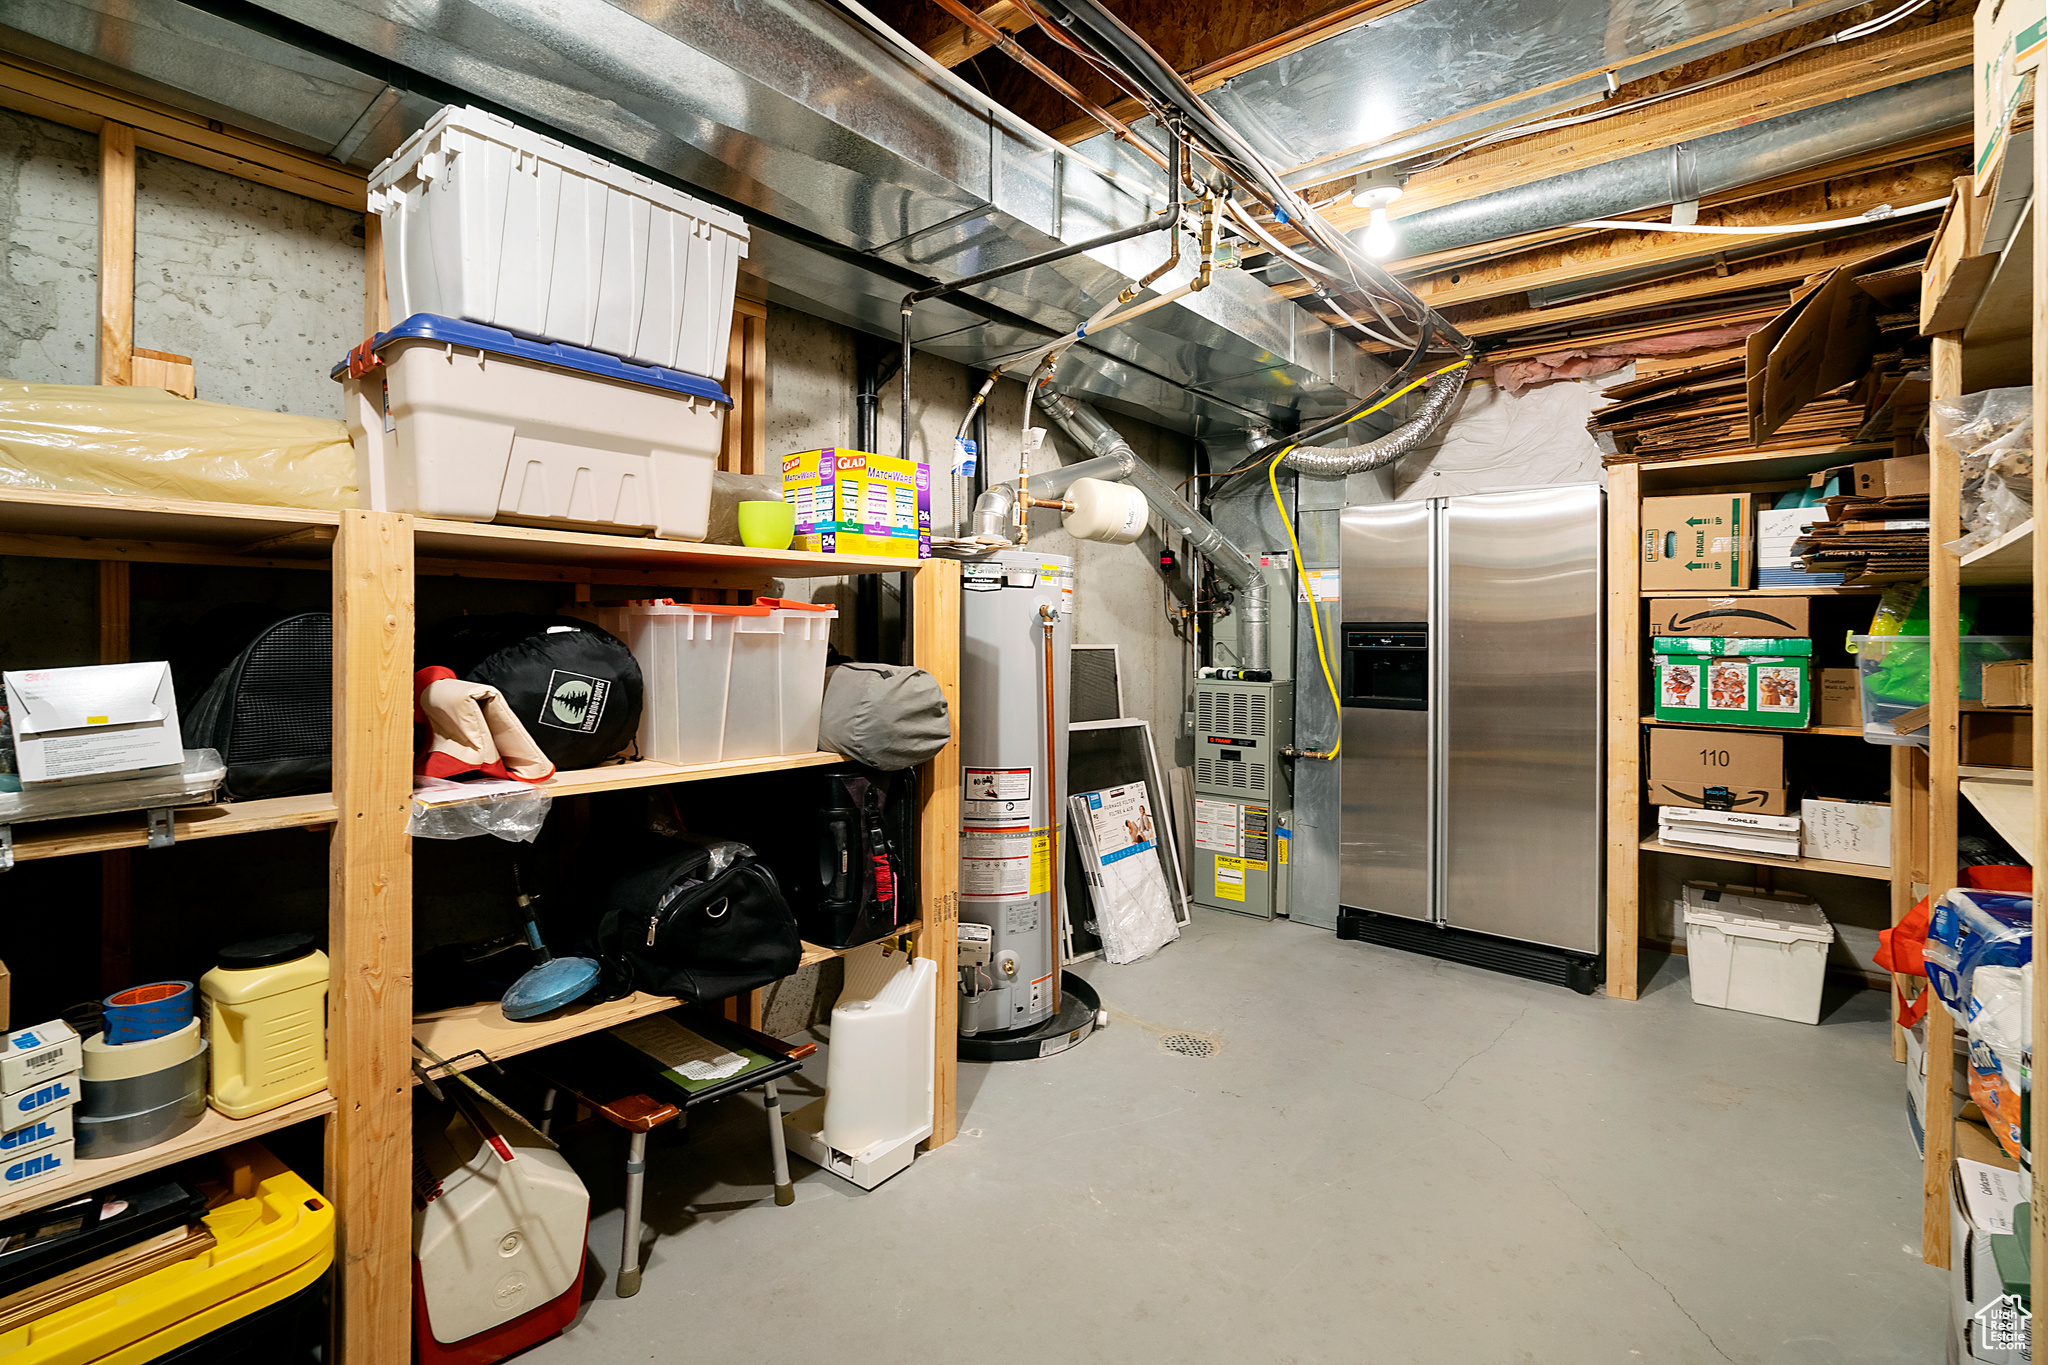 Shelving and Refrigerator stay